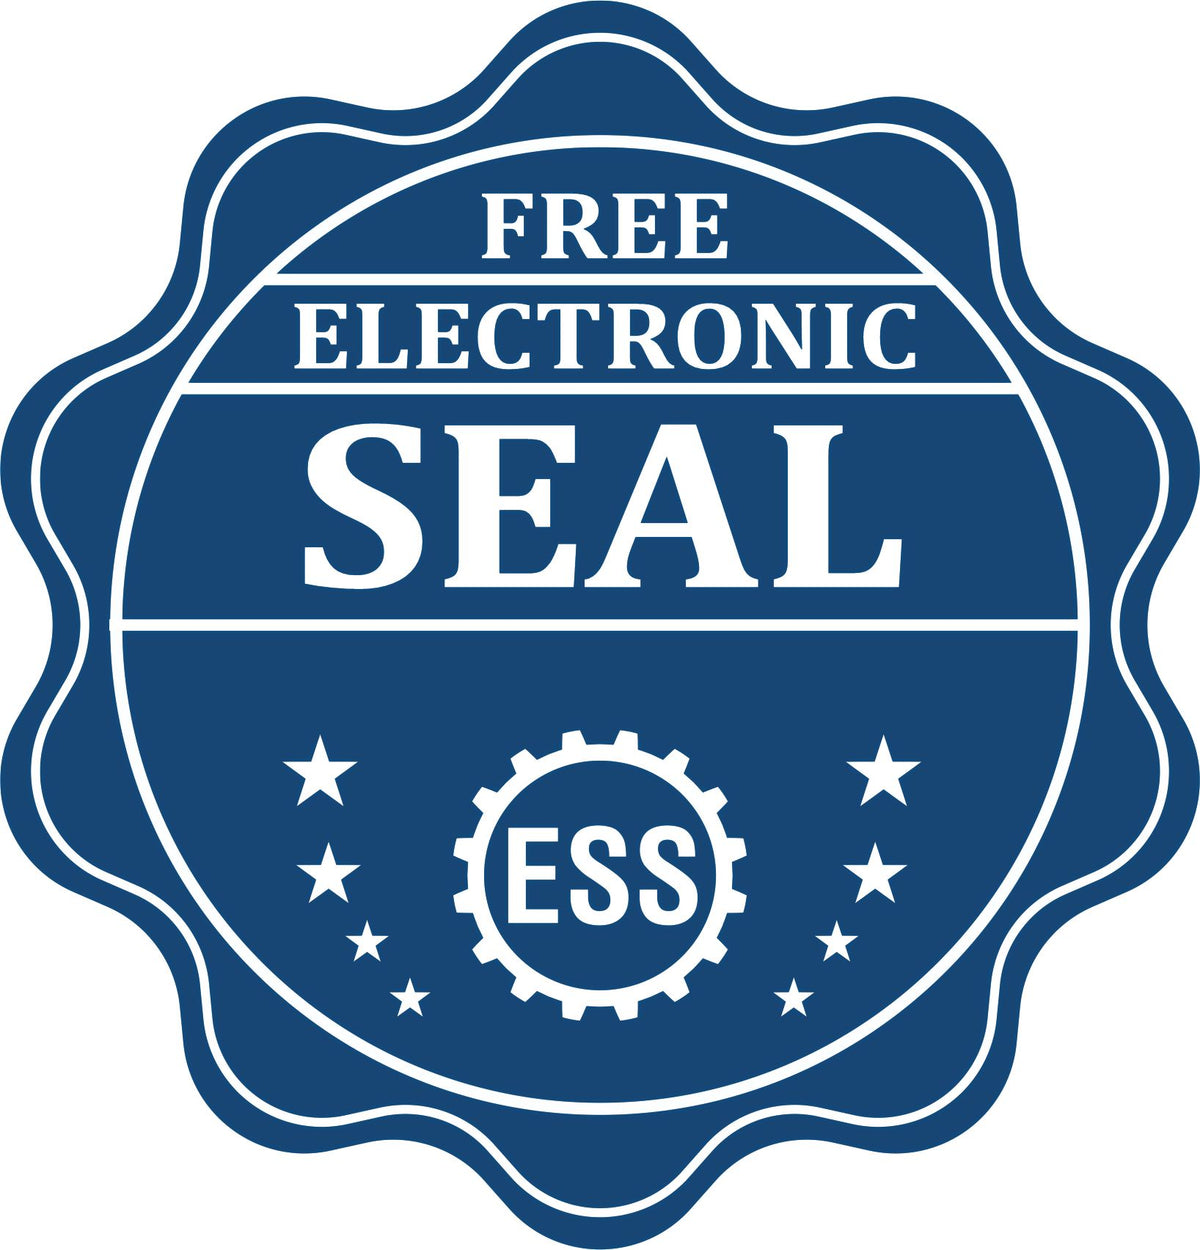 A badge showing a free electronic seal for the Slim Pre-Inked New Jersey Landscape Architect Seal Stamp with stars and the ESS gear on the emblem.